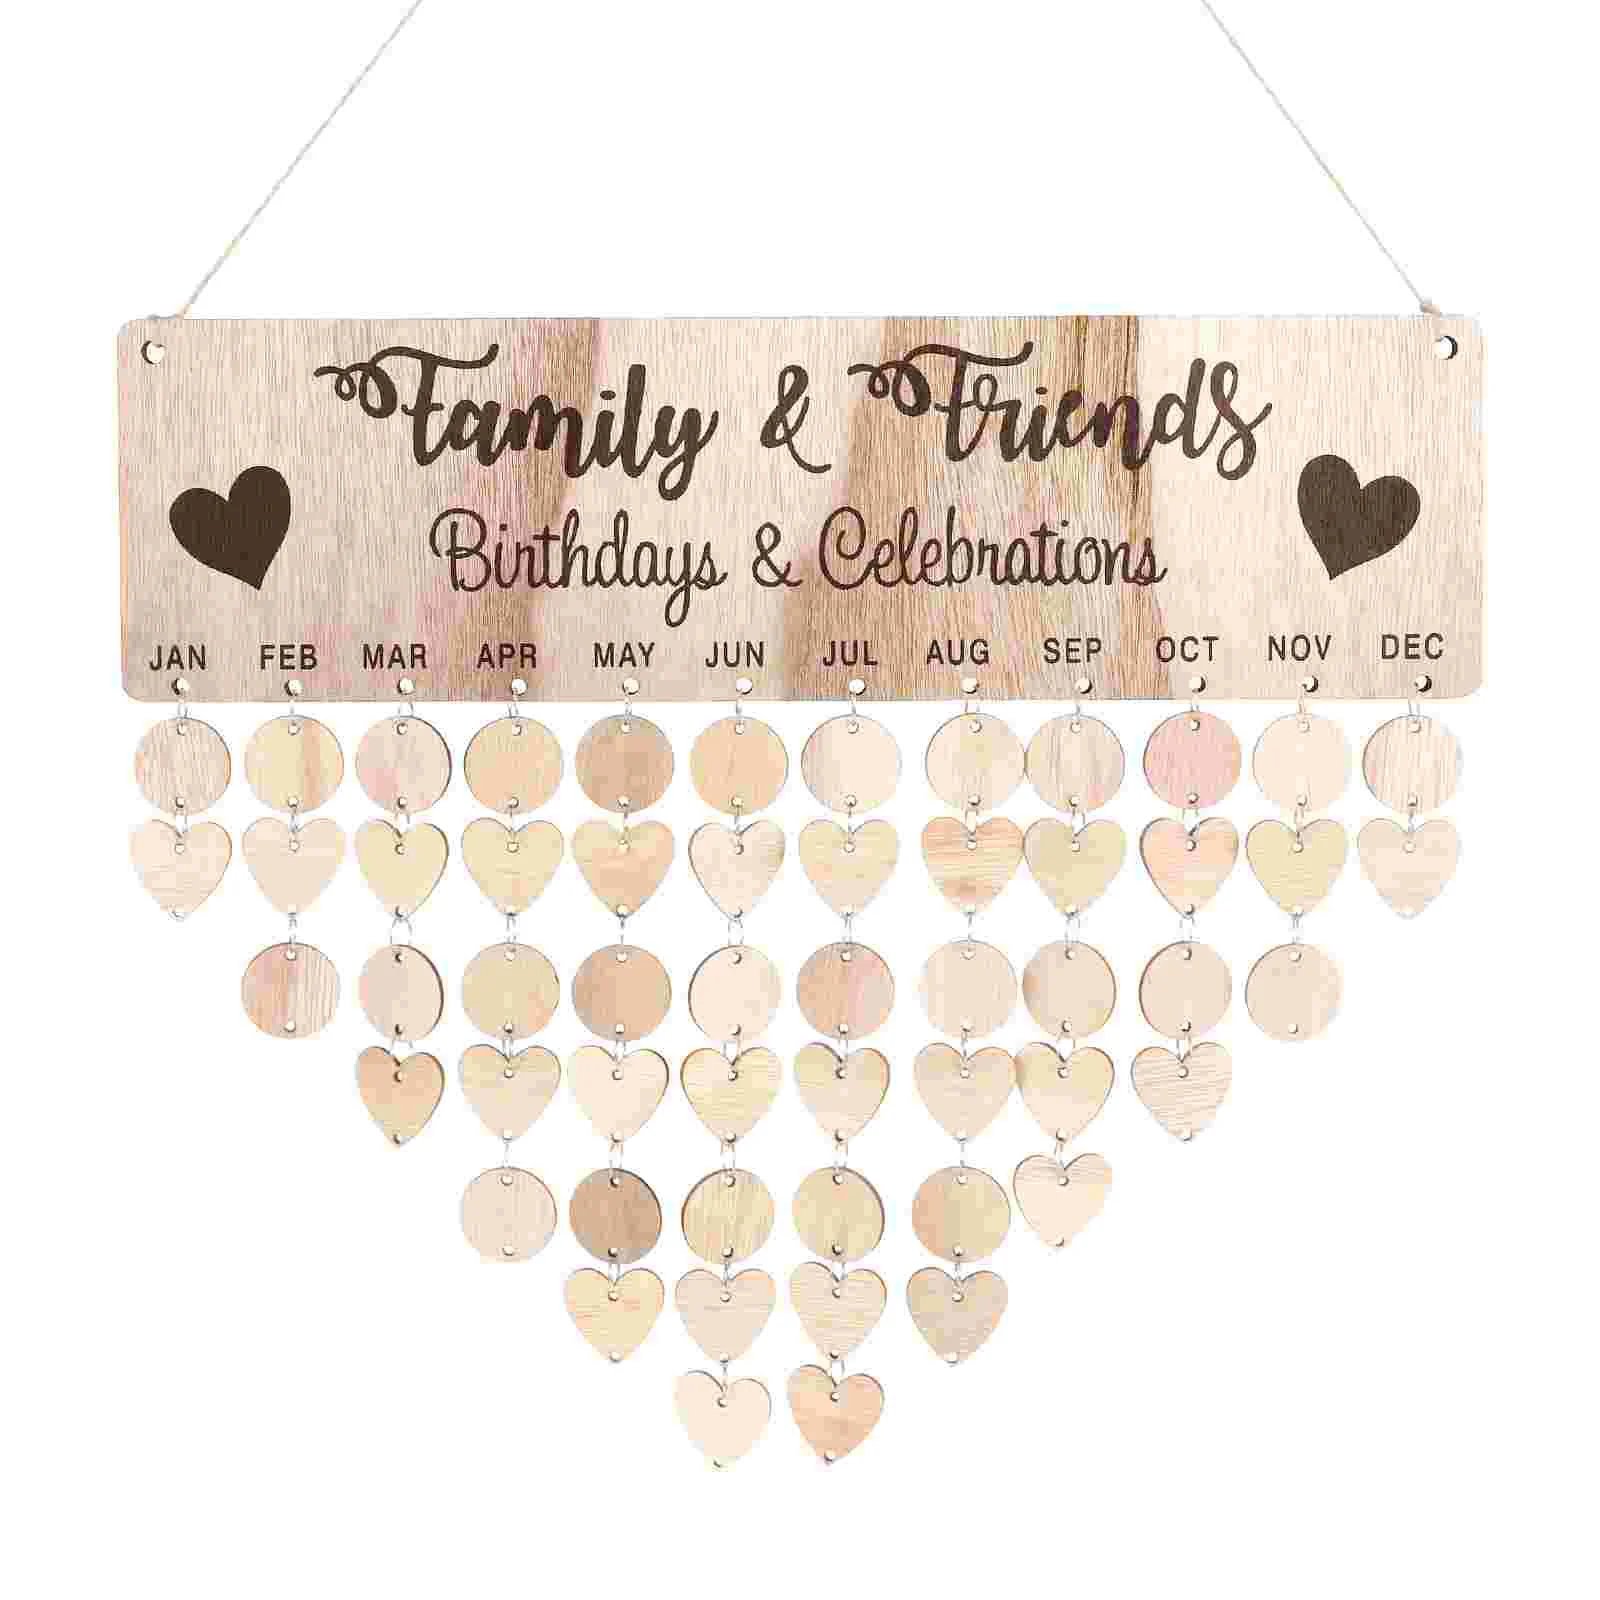 Calendar Birthday Family Board Hanging Wooden Wall Reminder Plaque Diy Personalized Wood Gifts Date Reminding Home Decor Tags reminder board wooden calendar board family birthday board wooden family birthday reminder calendar board family calendar